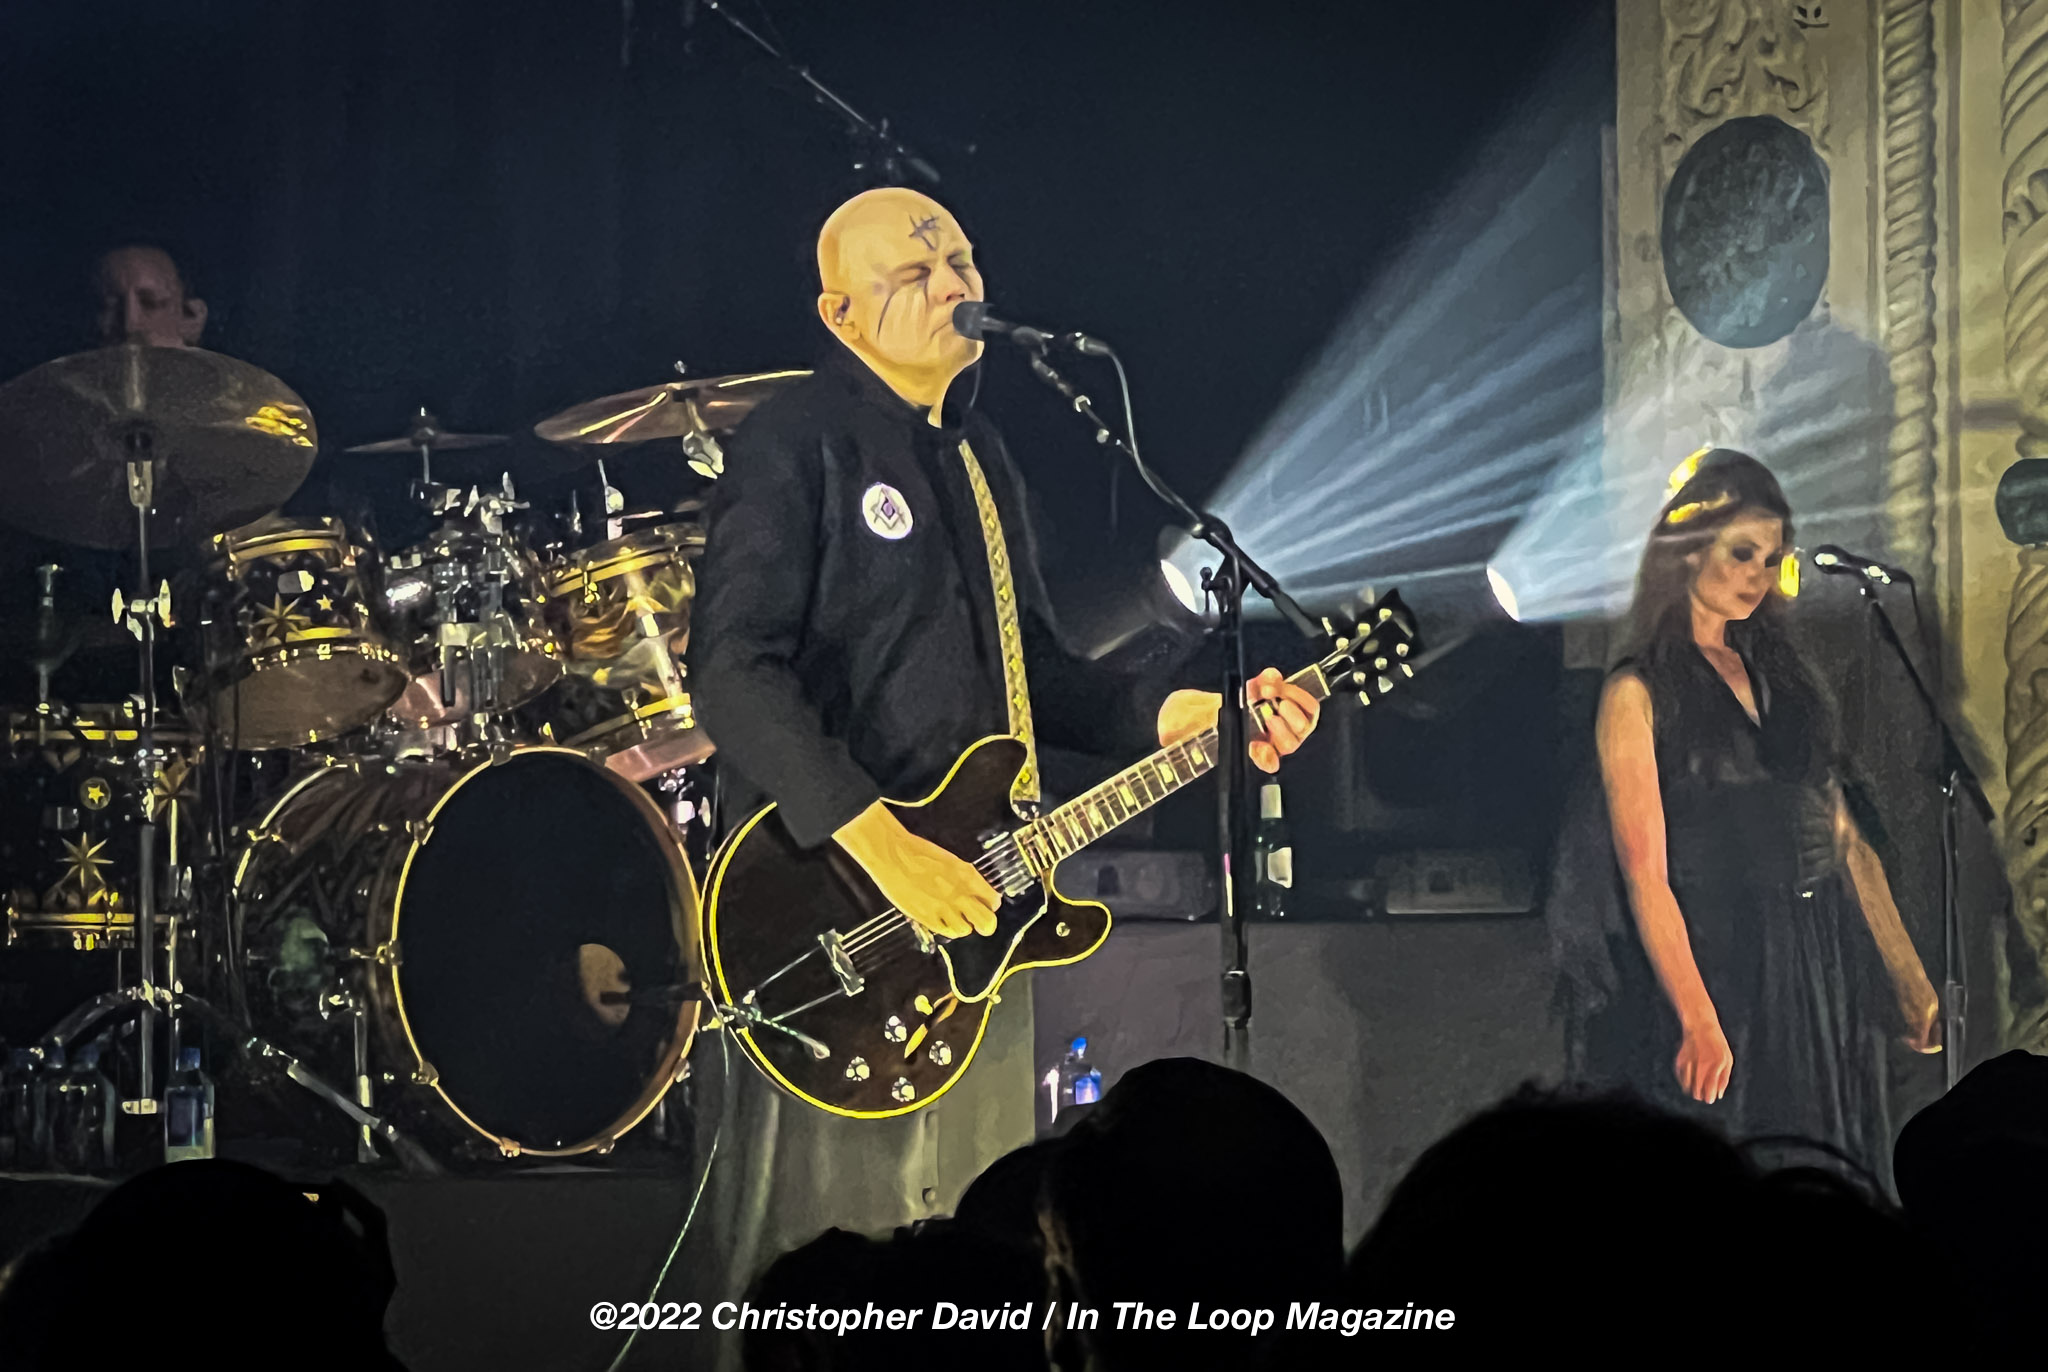 Live Review: Smashing Pumpkins Return Home And Play One Night In The Small Club That Helped Start It All